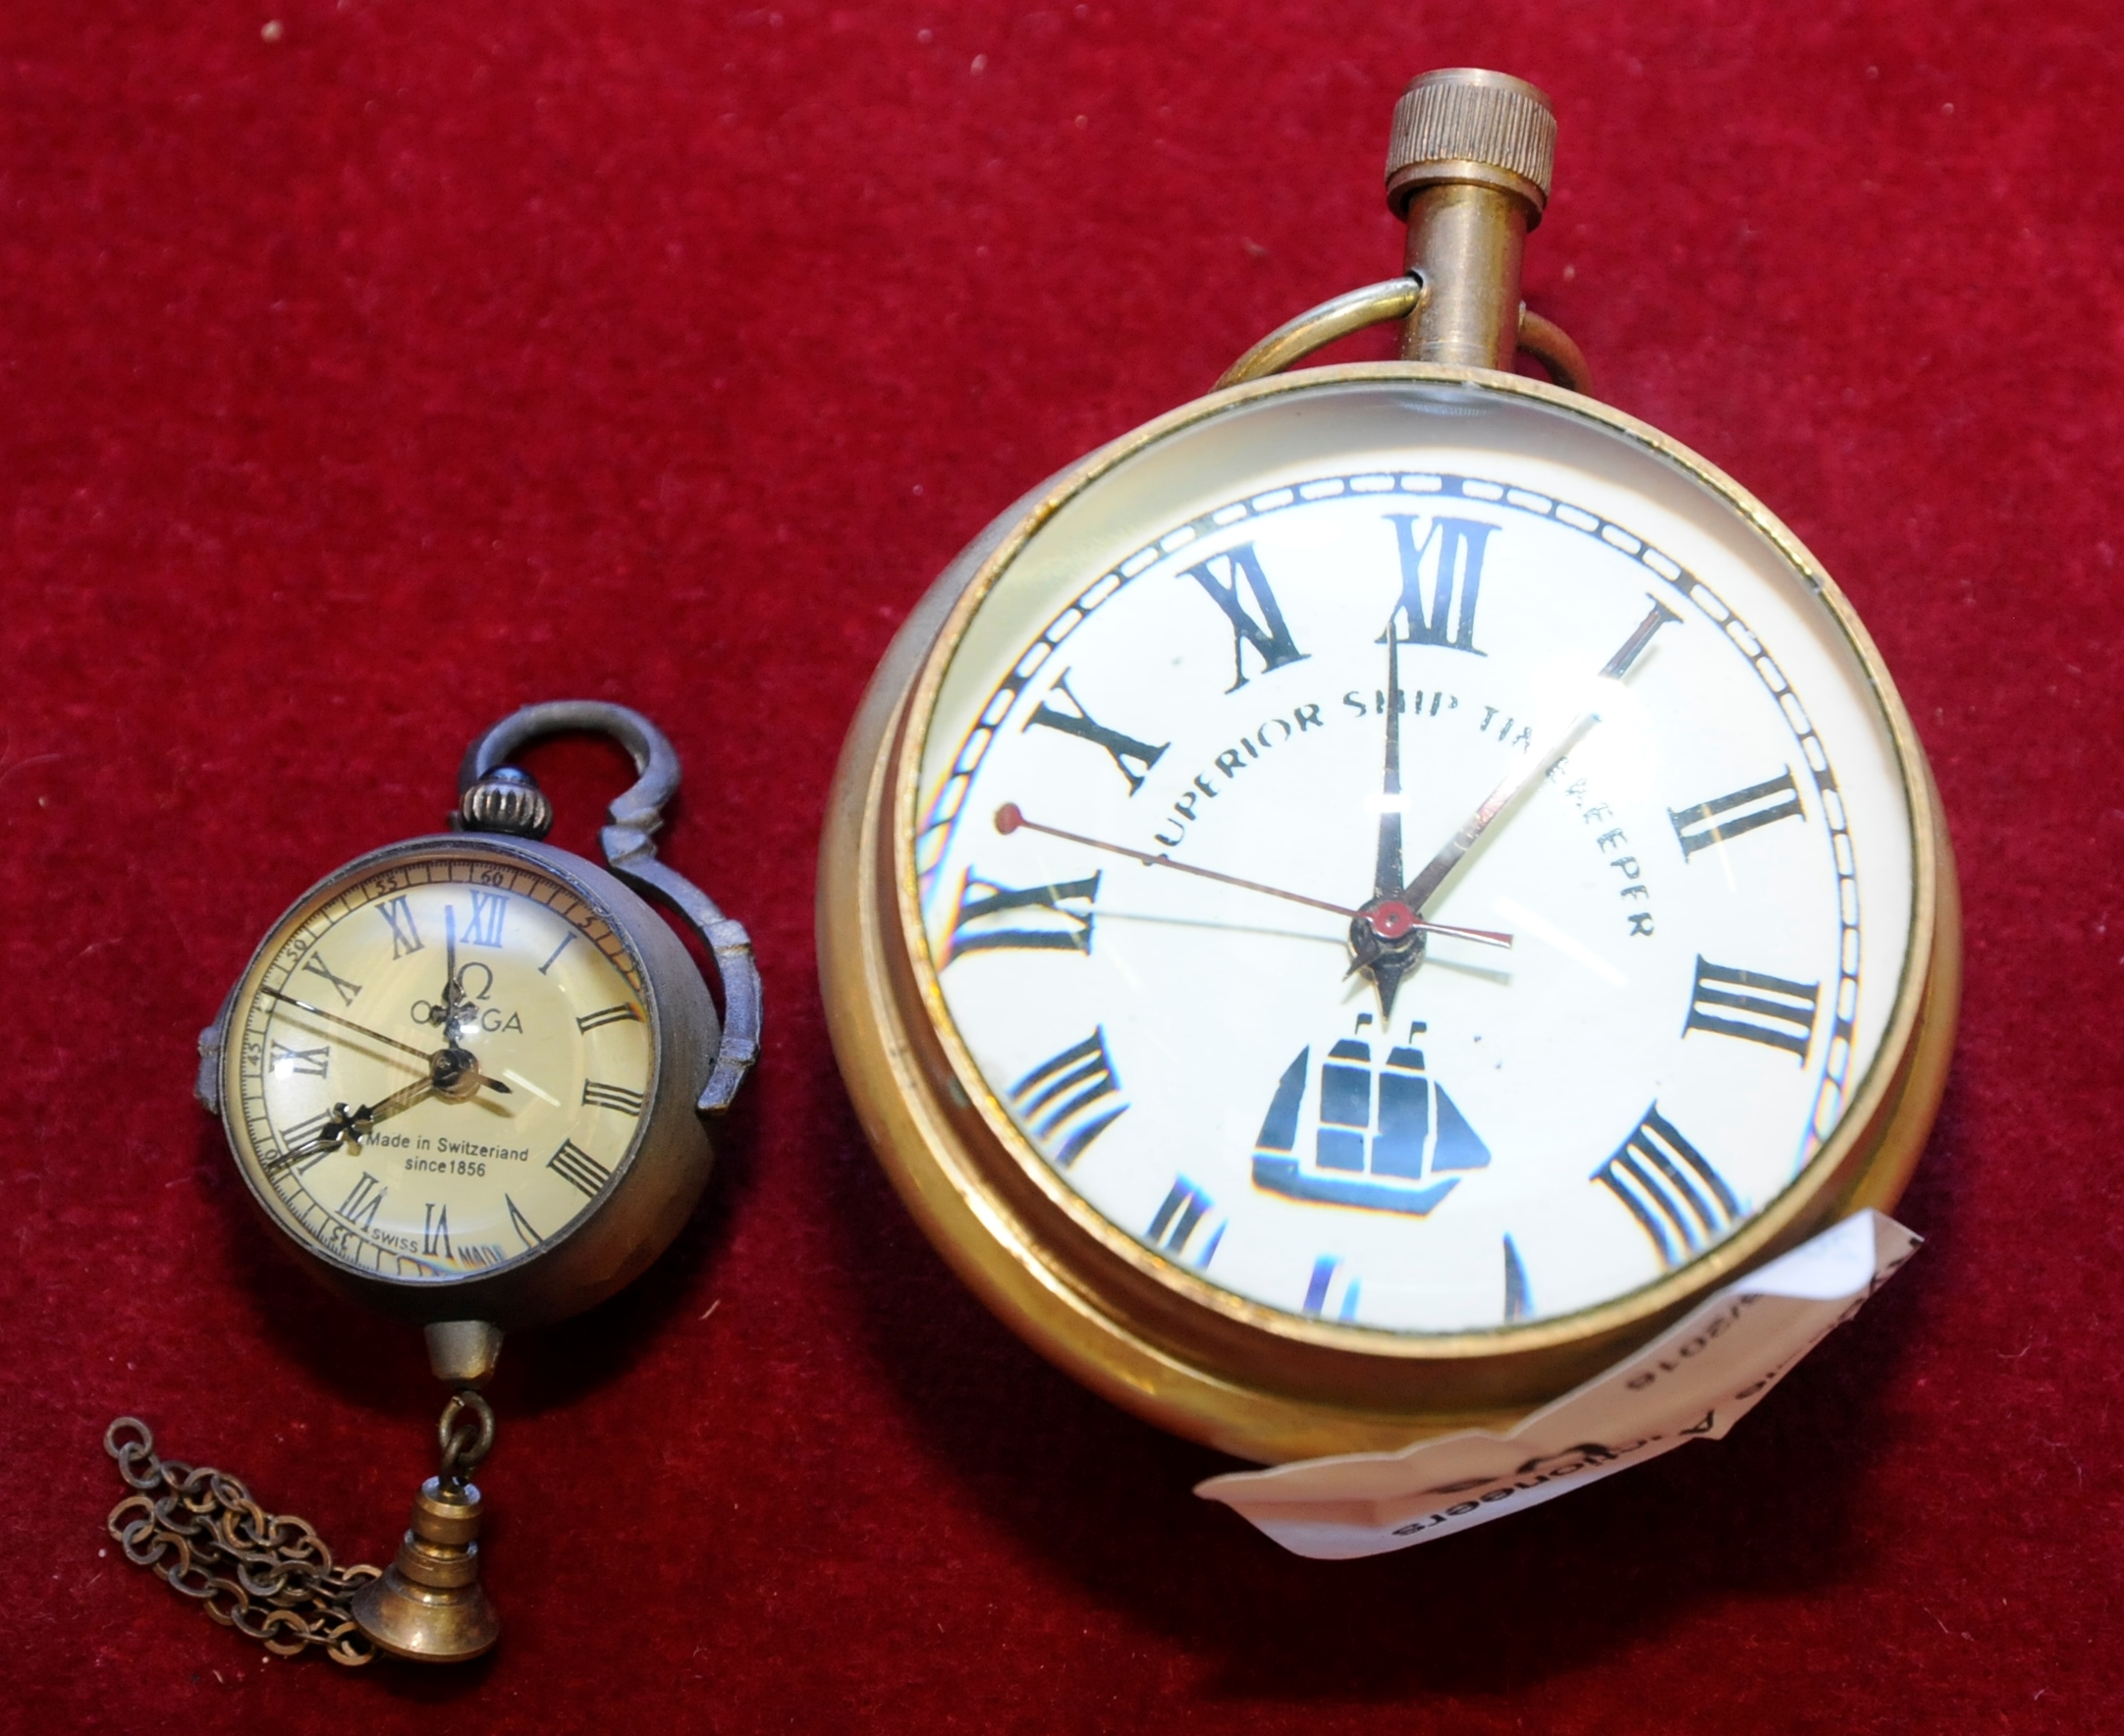 Superior Ship timekeepers reproduction globe style watch and another similar hanging globe watch